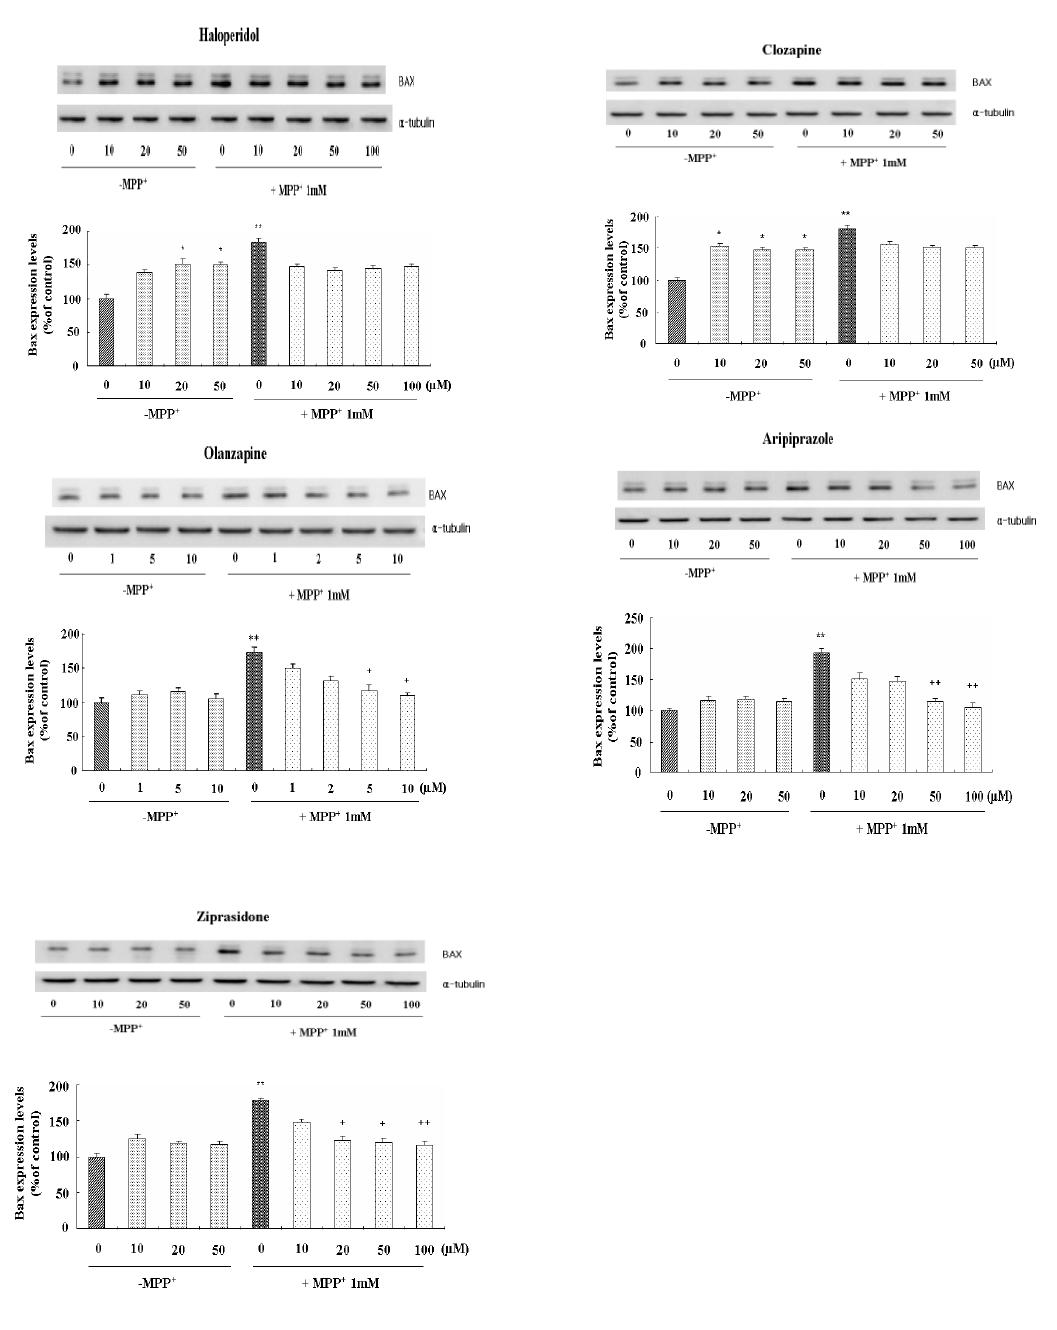 The effects of antipsychotics on MPP+-induced of Bax levels in PC12 cells.